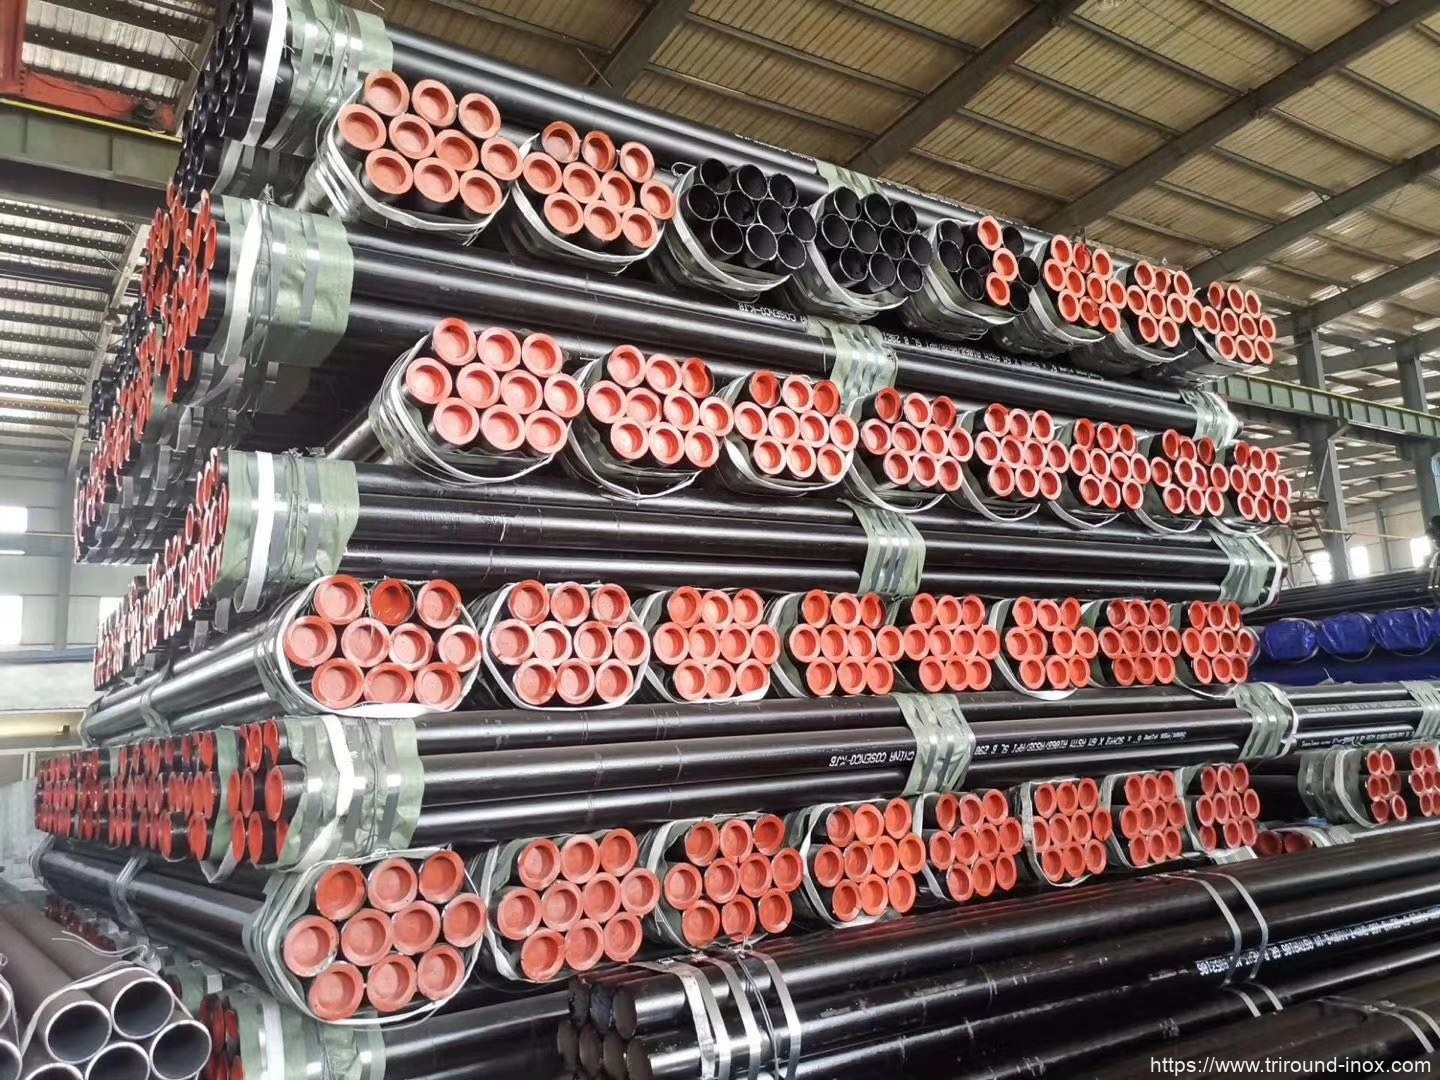 Wholesale Dealers of Neck Flange -
 API 5CT K55 Casing Tubing Suppliers, K55 Oil And Gas Api Casing Pipe Exporters – Triround